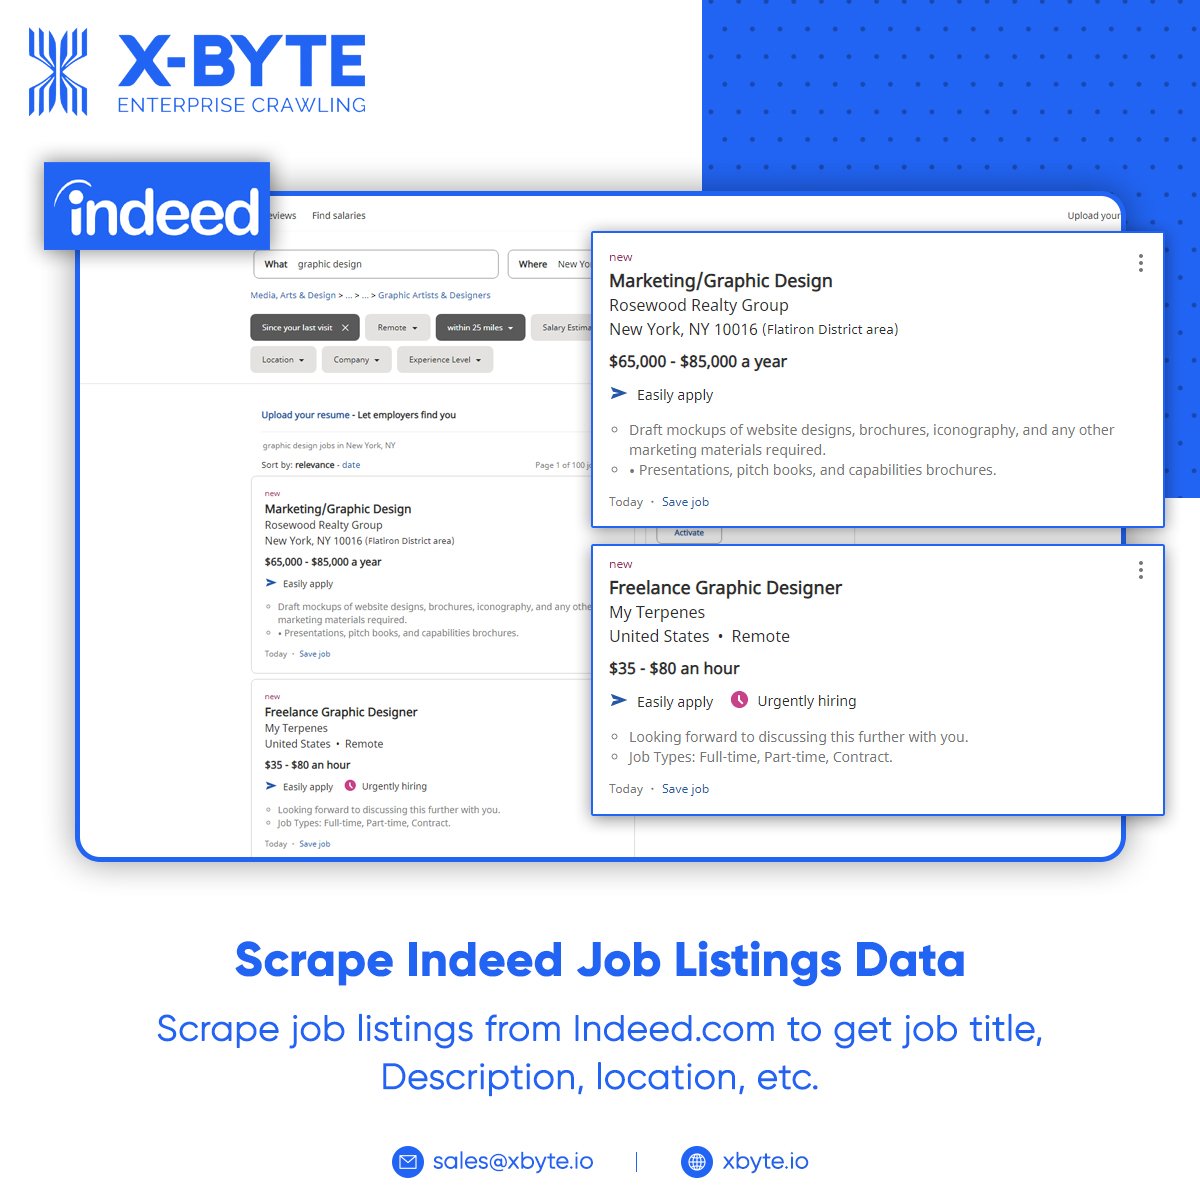 Indeed Job Listings scraping helps in extracting job details of No. of companies. Get details like Job Title, Description, Company Name, Location, Skill, Seniority level, etc.

xbyte.io/scrape-job-pos…

#ScrapeIndeedData #IndeedJobScraper #IndeedJobScraping #xbyteio #USA #UK #UAE